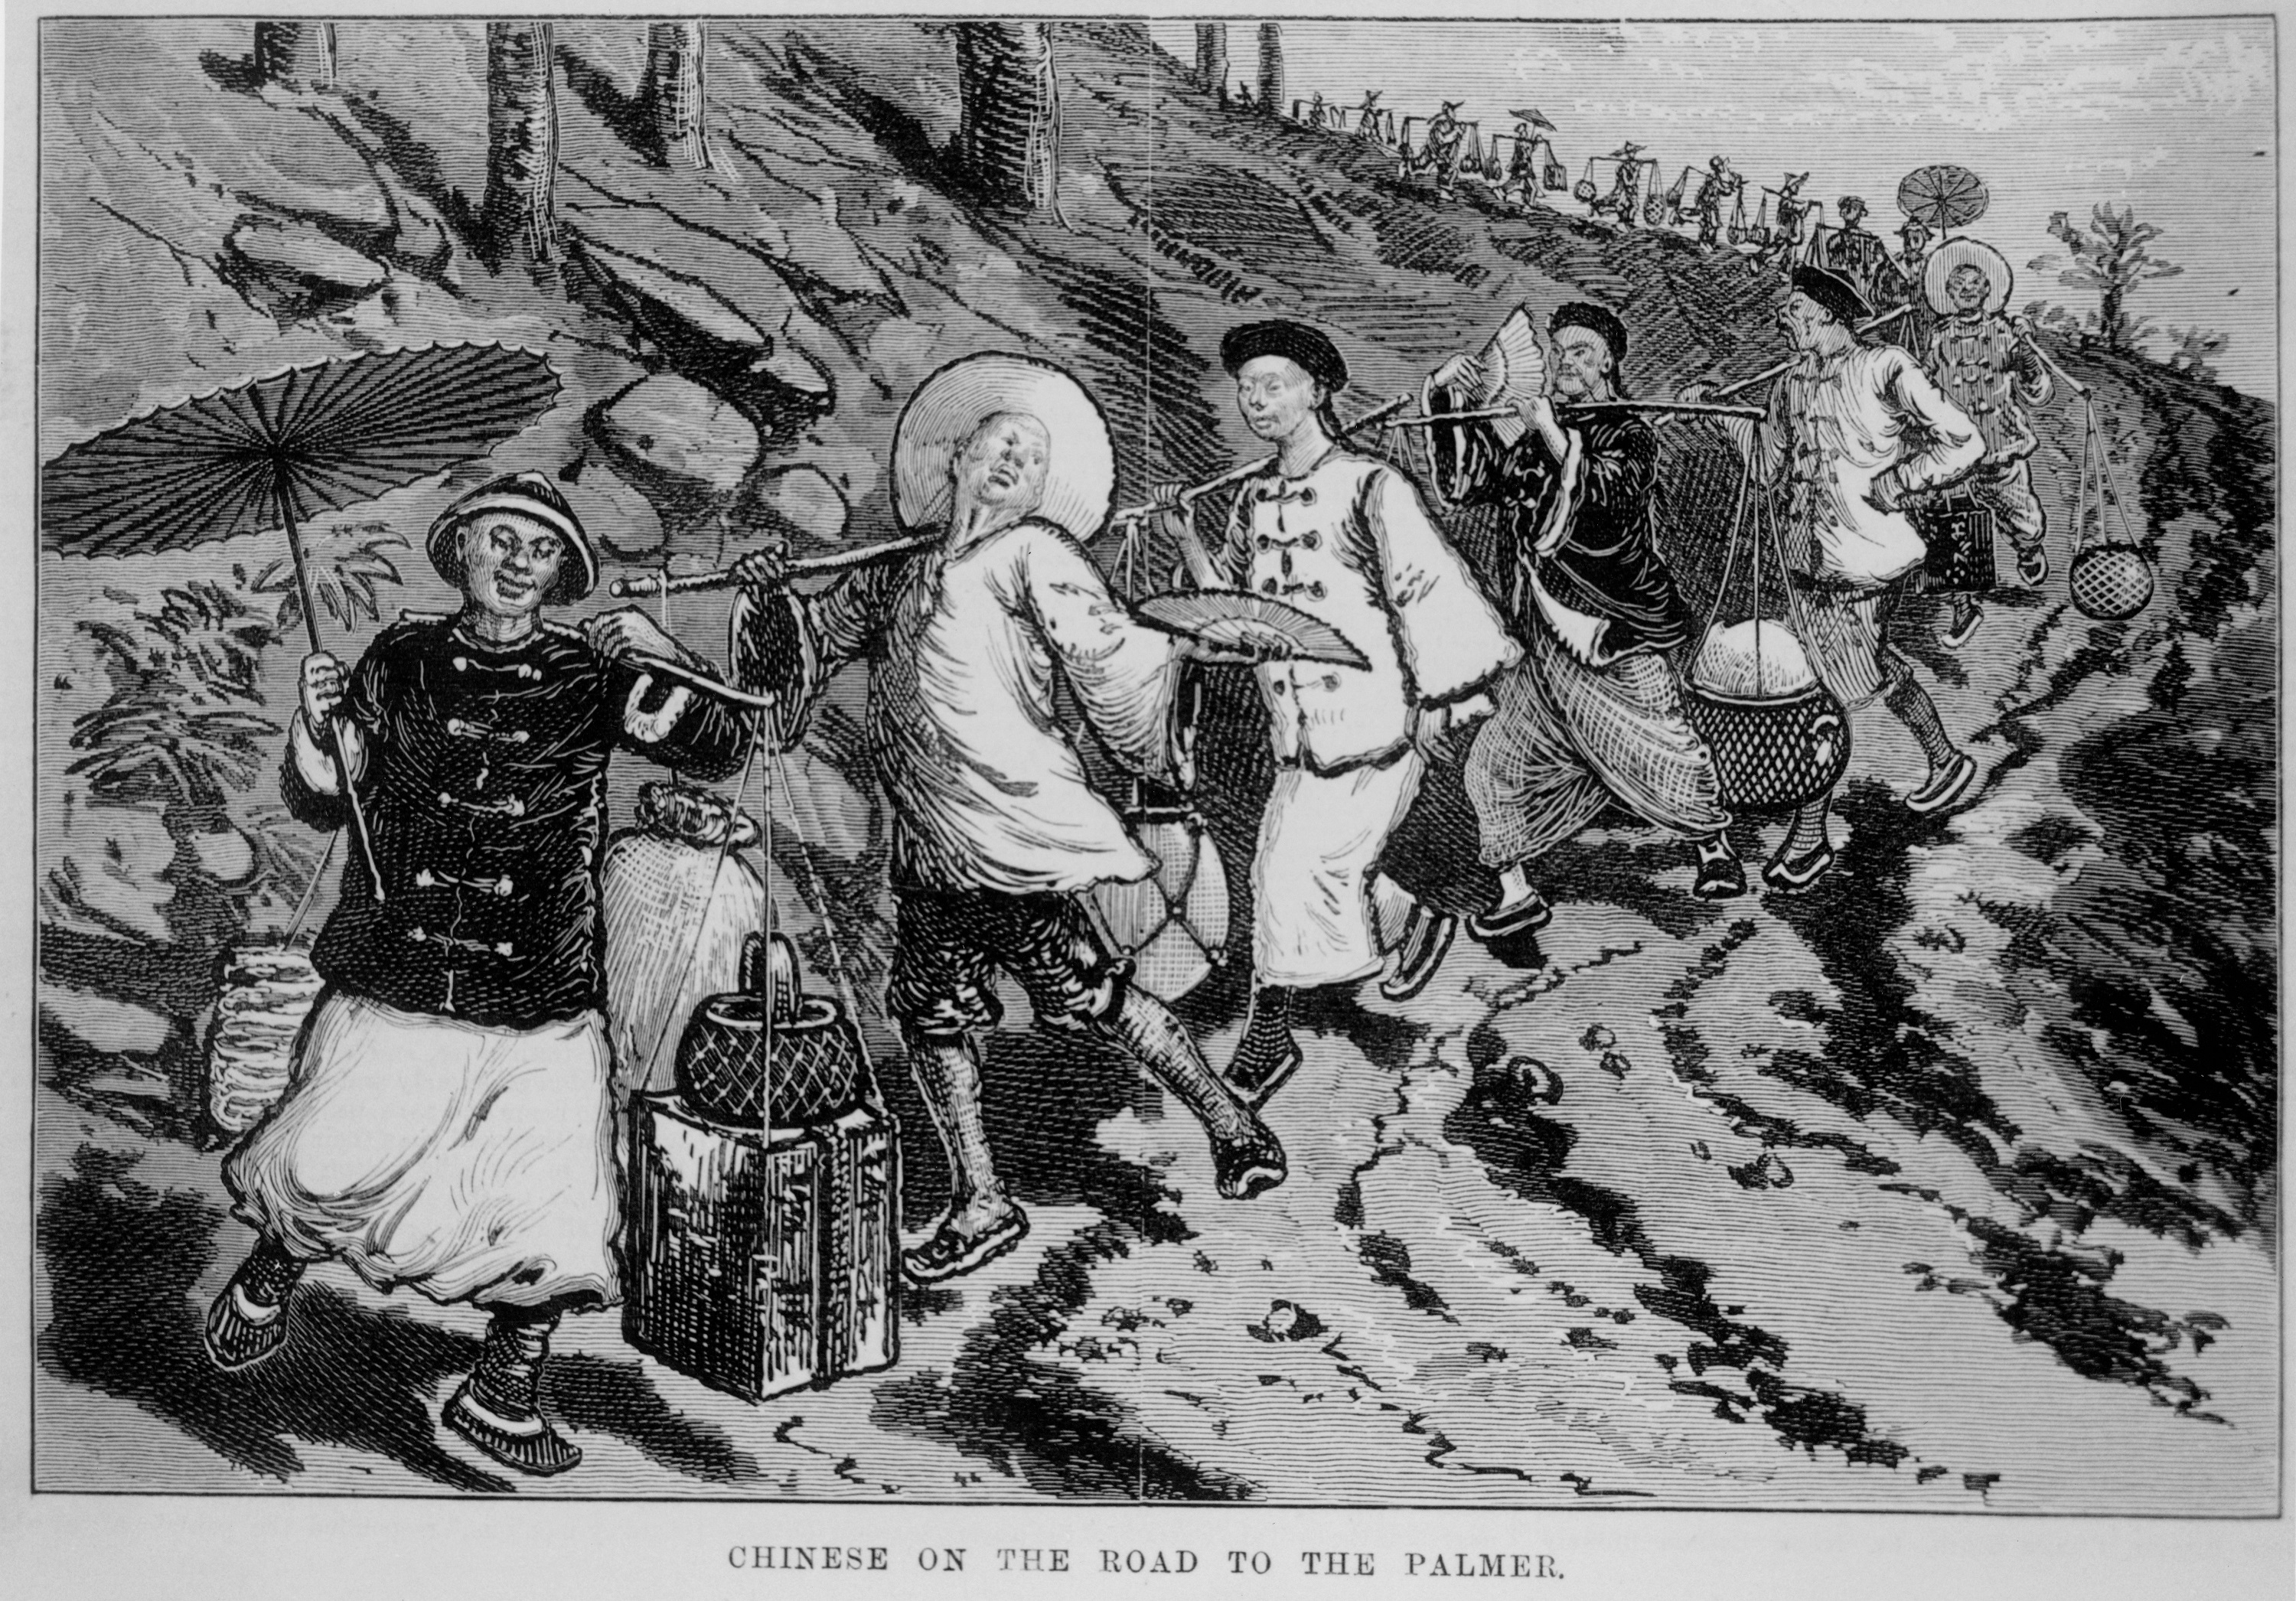 Drawing of Chinese people on the road to the Palmer Goldfield, Queensland, 1875